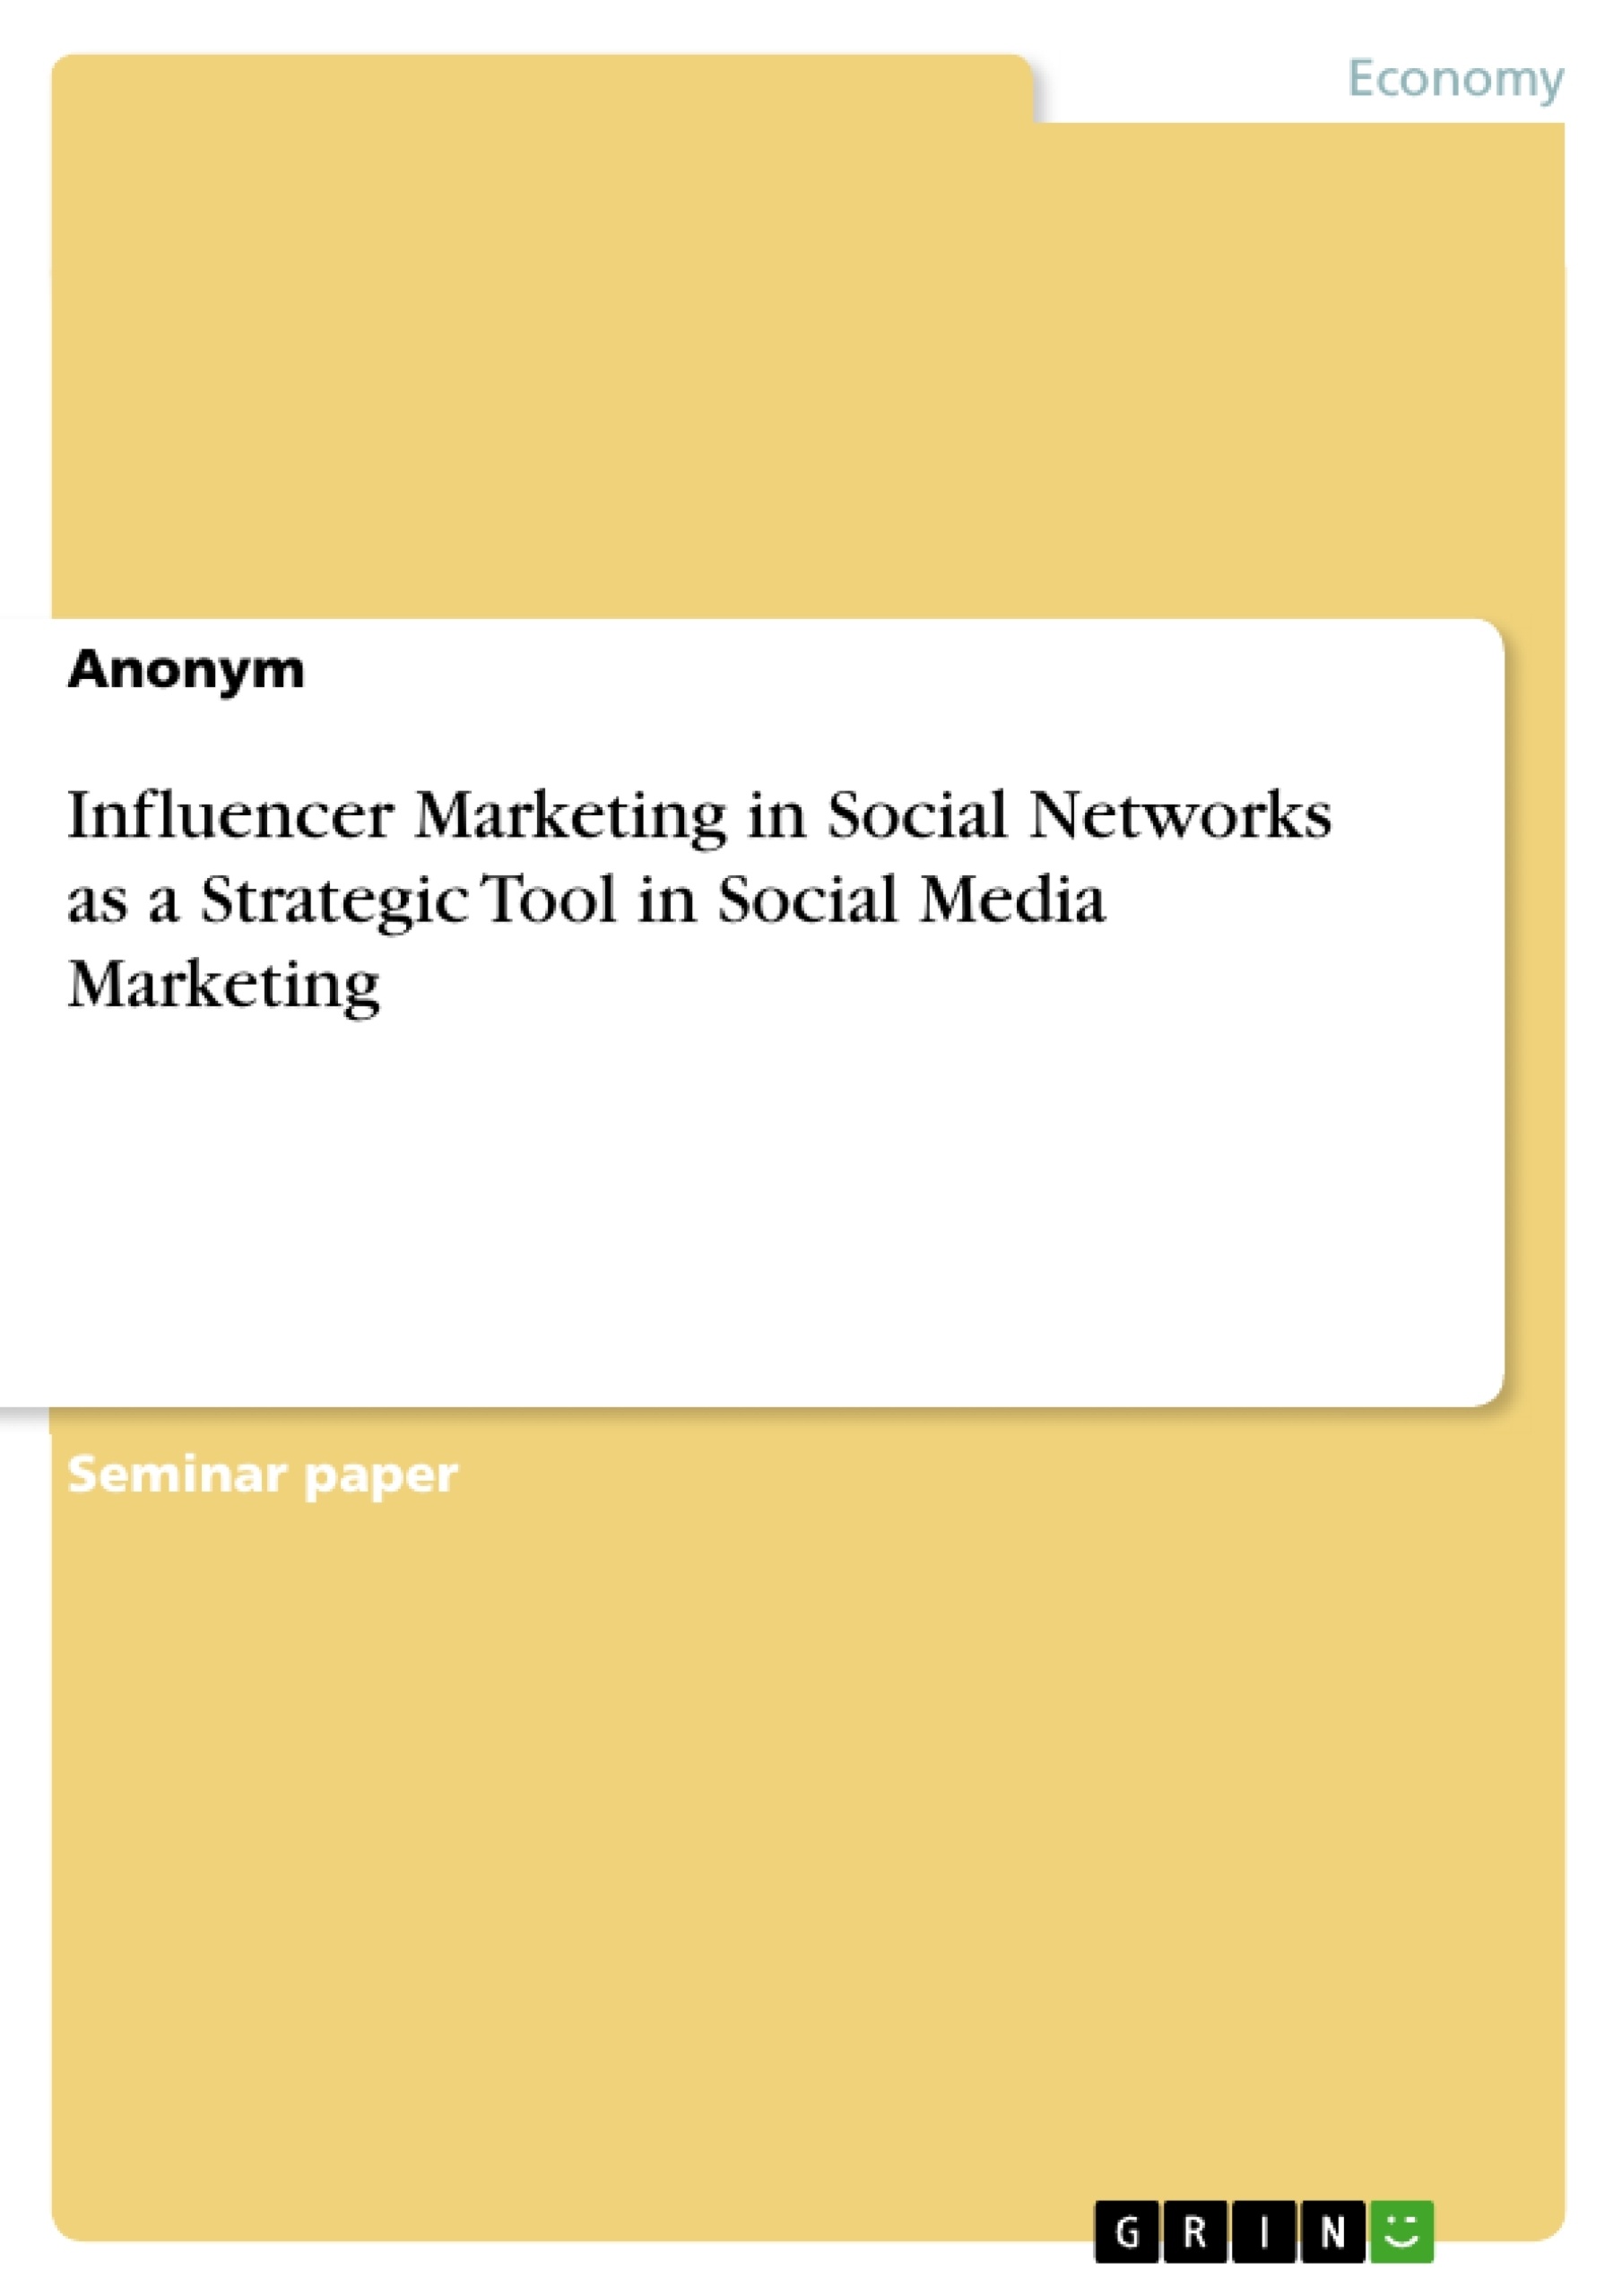 Title: Influencer Marketing in Social Networks as a Strategic Tool in Social Media Marketing